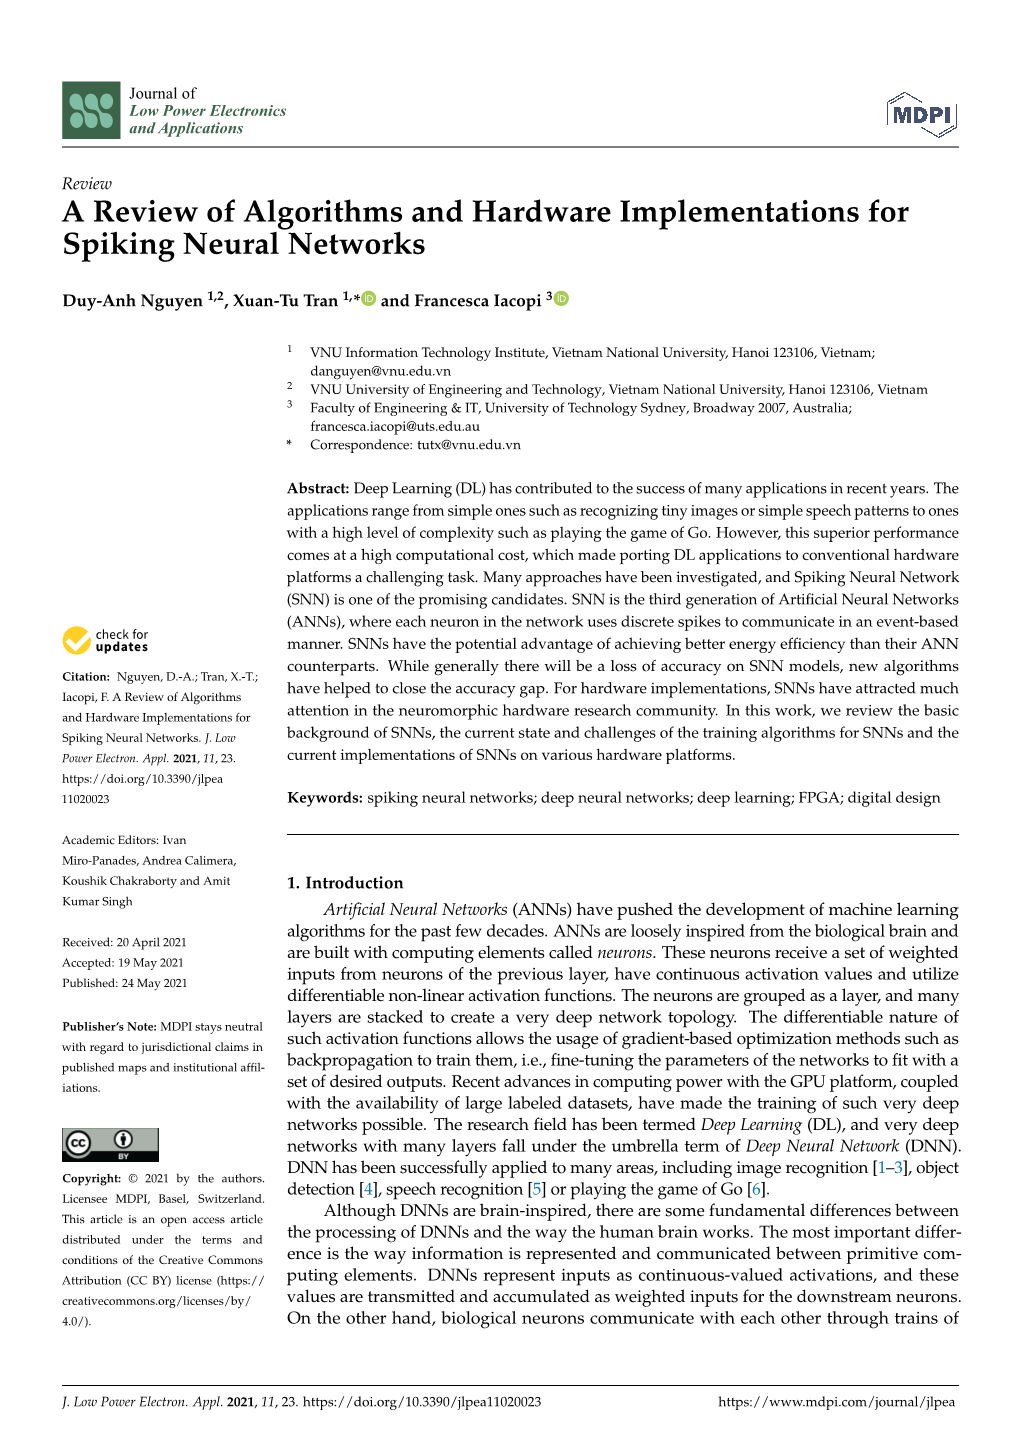 A Review of Algorithms and Hardware Implementations for Spiking Neural Networks